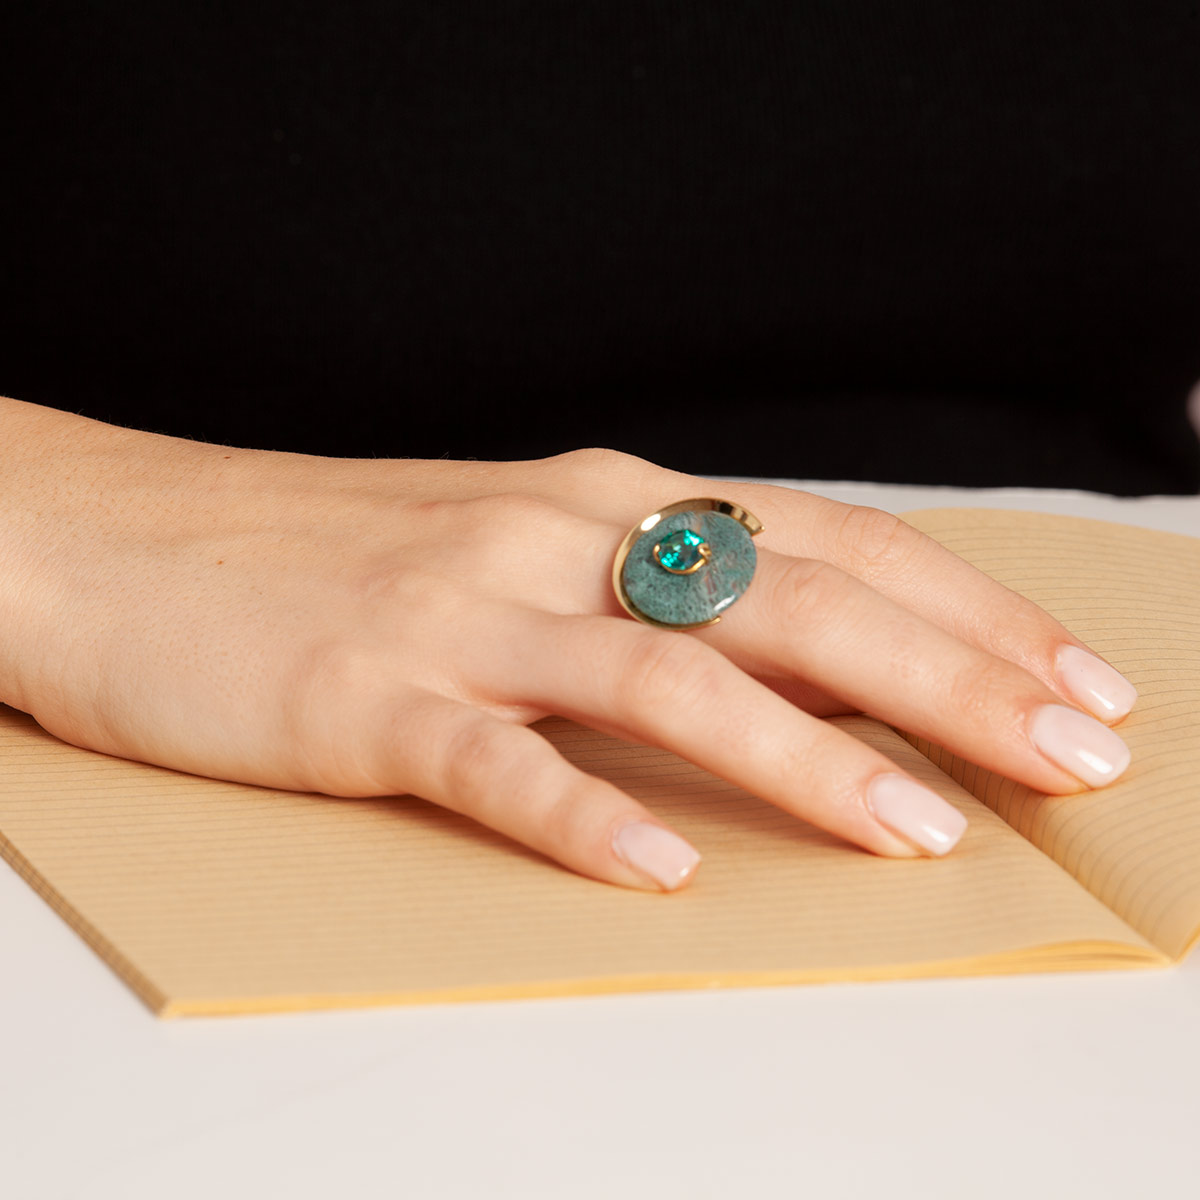 Cei handmade ring in 9k or 18k gold, moss agate and peridot on hand designed by Belen Bajo